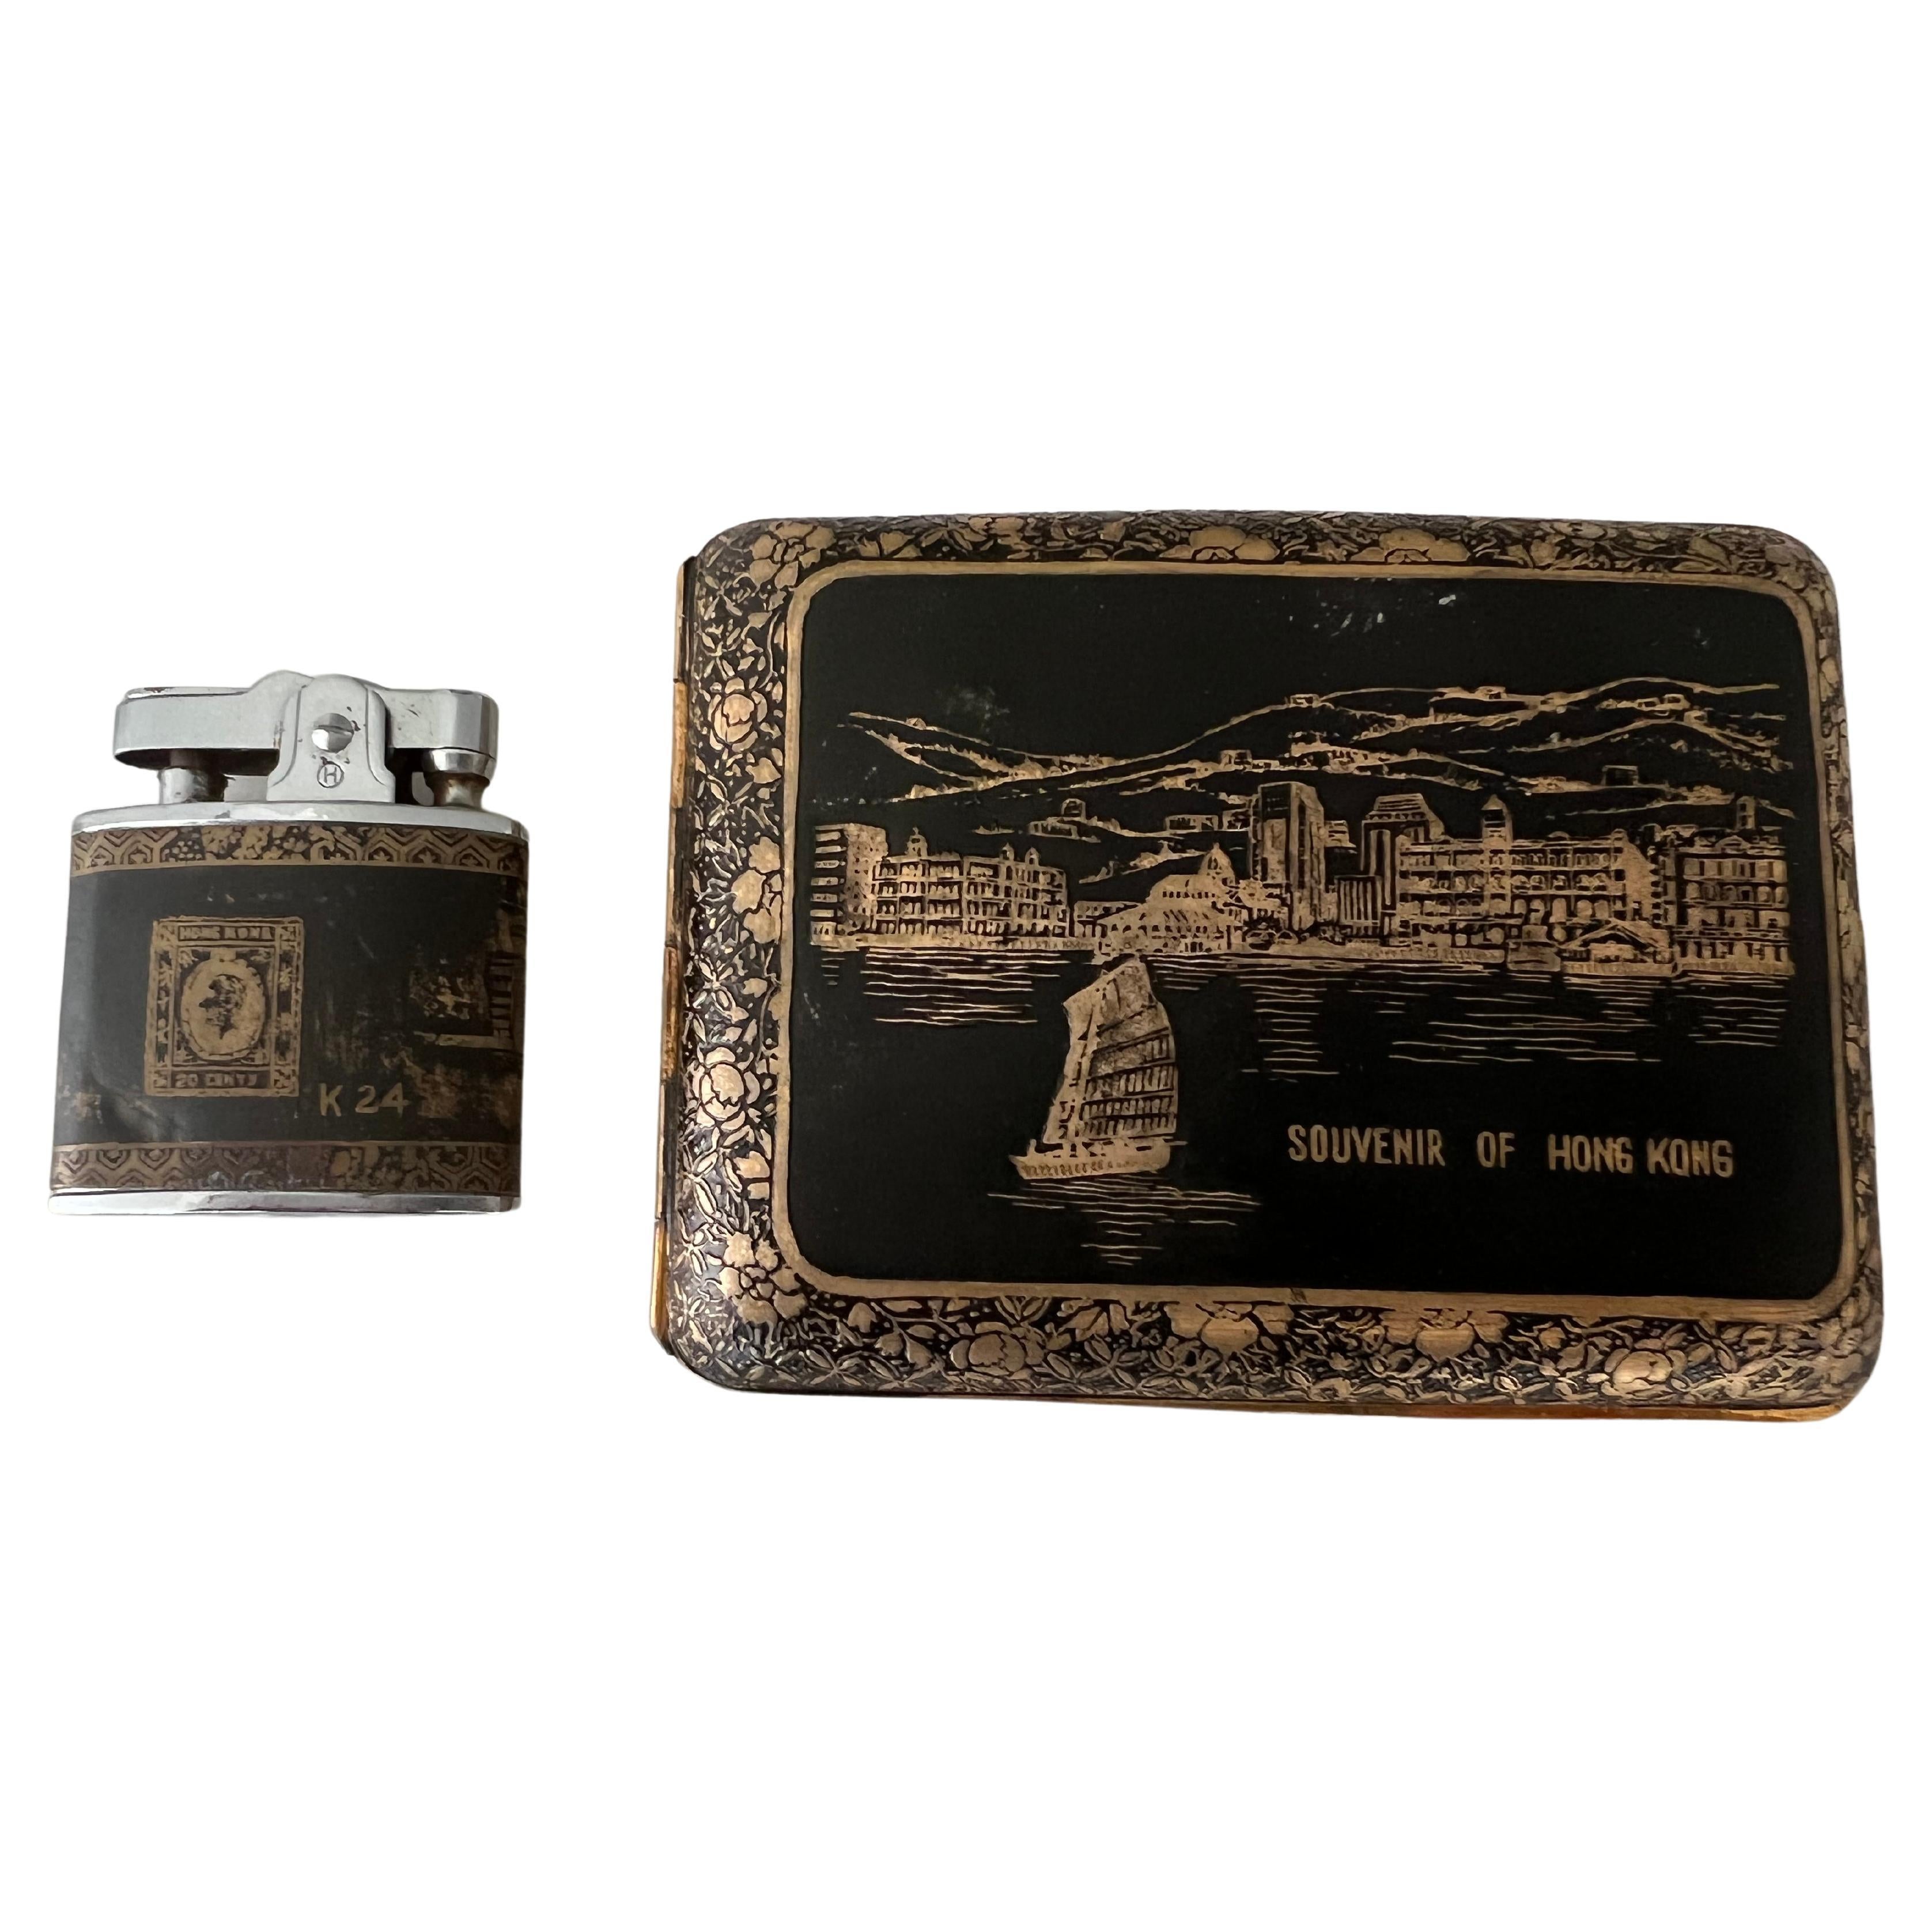 A piece of fun and chic history - Vintage Japanese golden KOMAI  SOUVENIR of HONG KONG cigarette CASE+LIGHTER set in mint condition. 
Japanese Komai Style Cigarette Case & Lighter Set Meiji Period
This antique Japanese cigarette case is signed by an